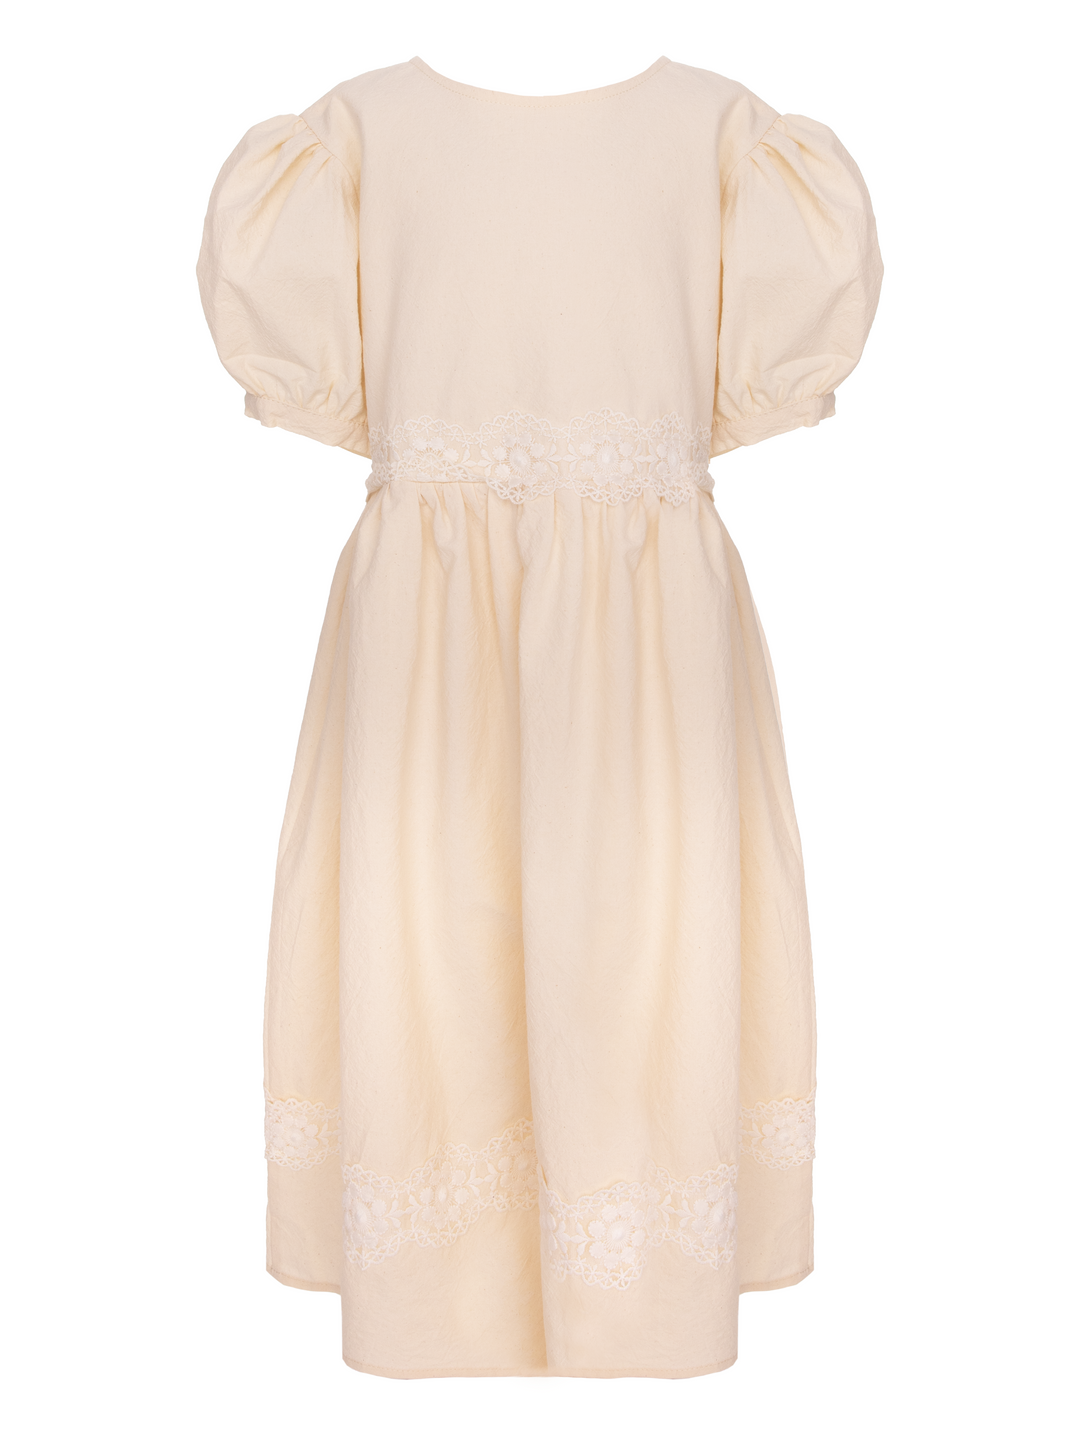 GLORIA DRESS-BEIGE WITH LACE INSERTION